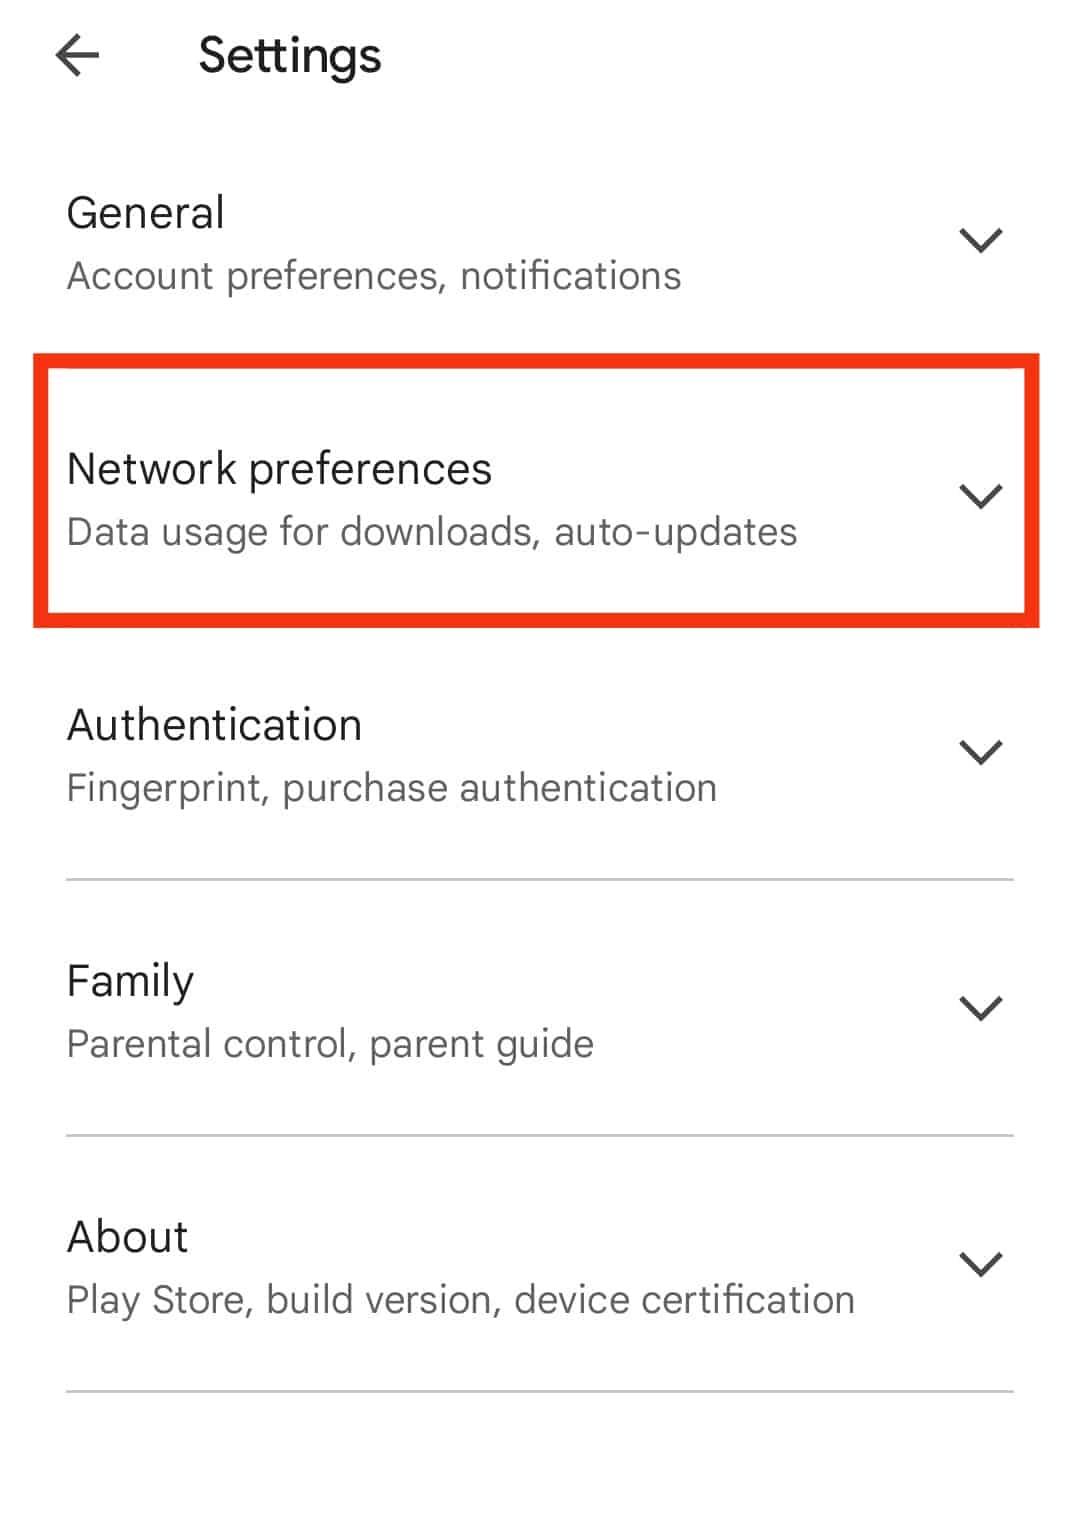 Tap On The Network Preferences Option